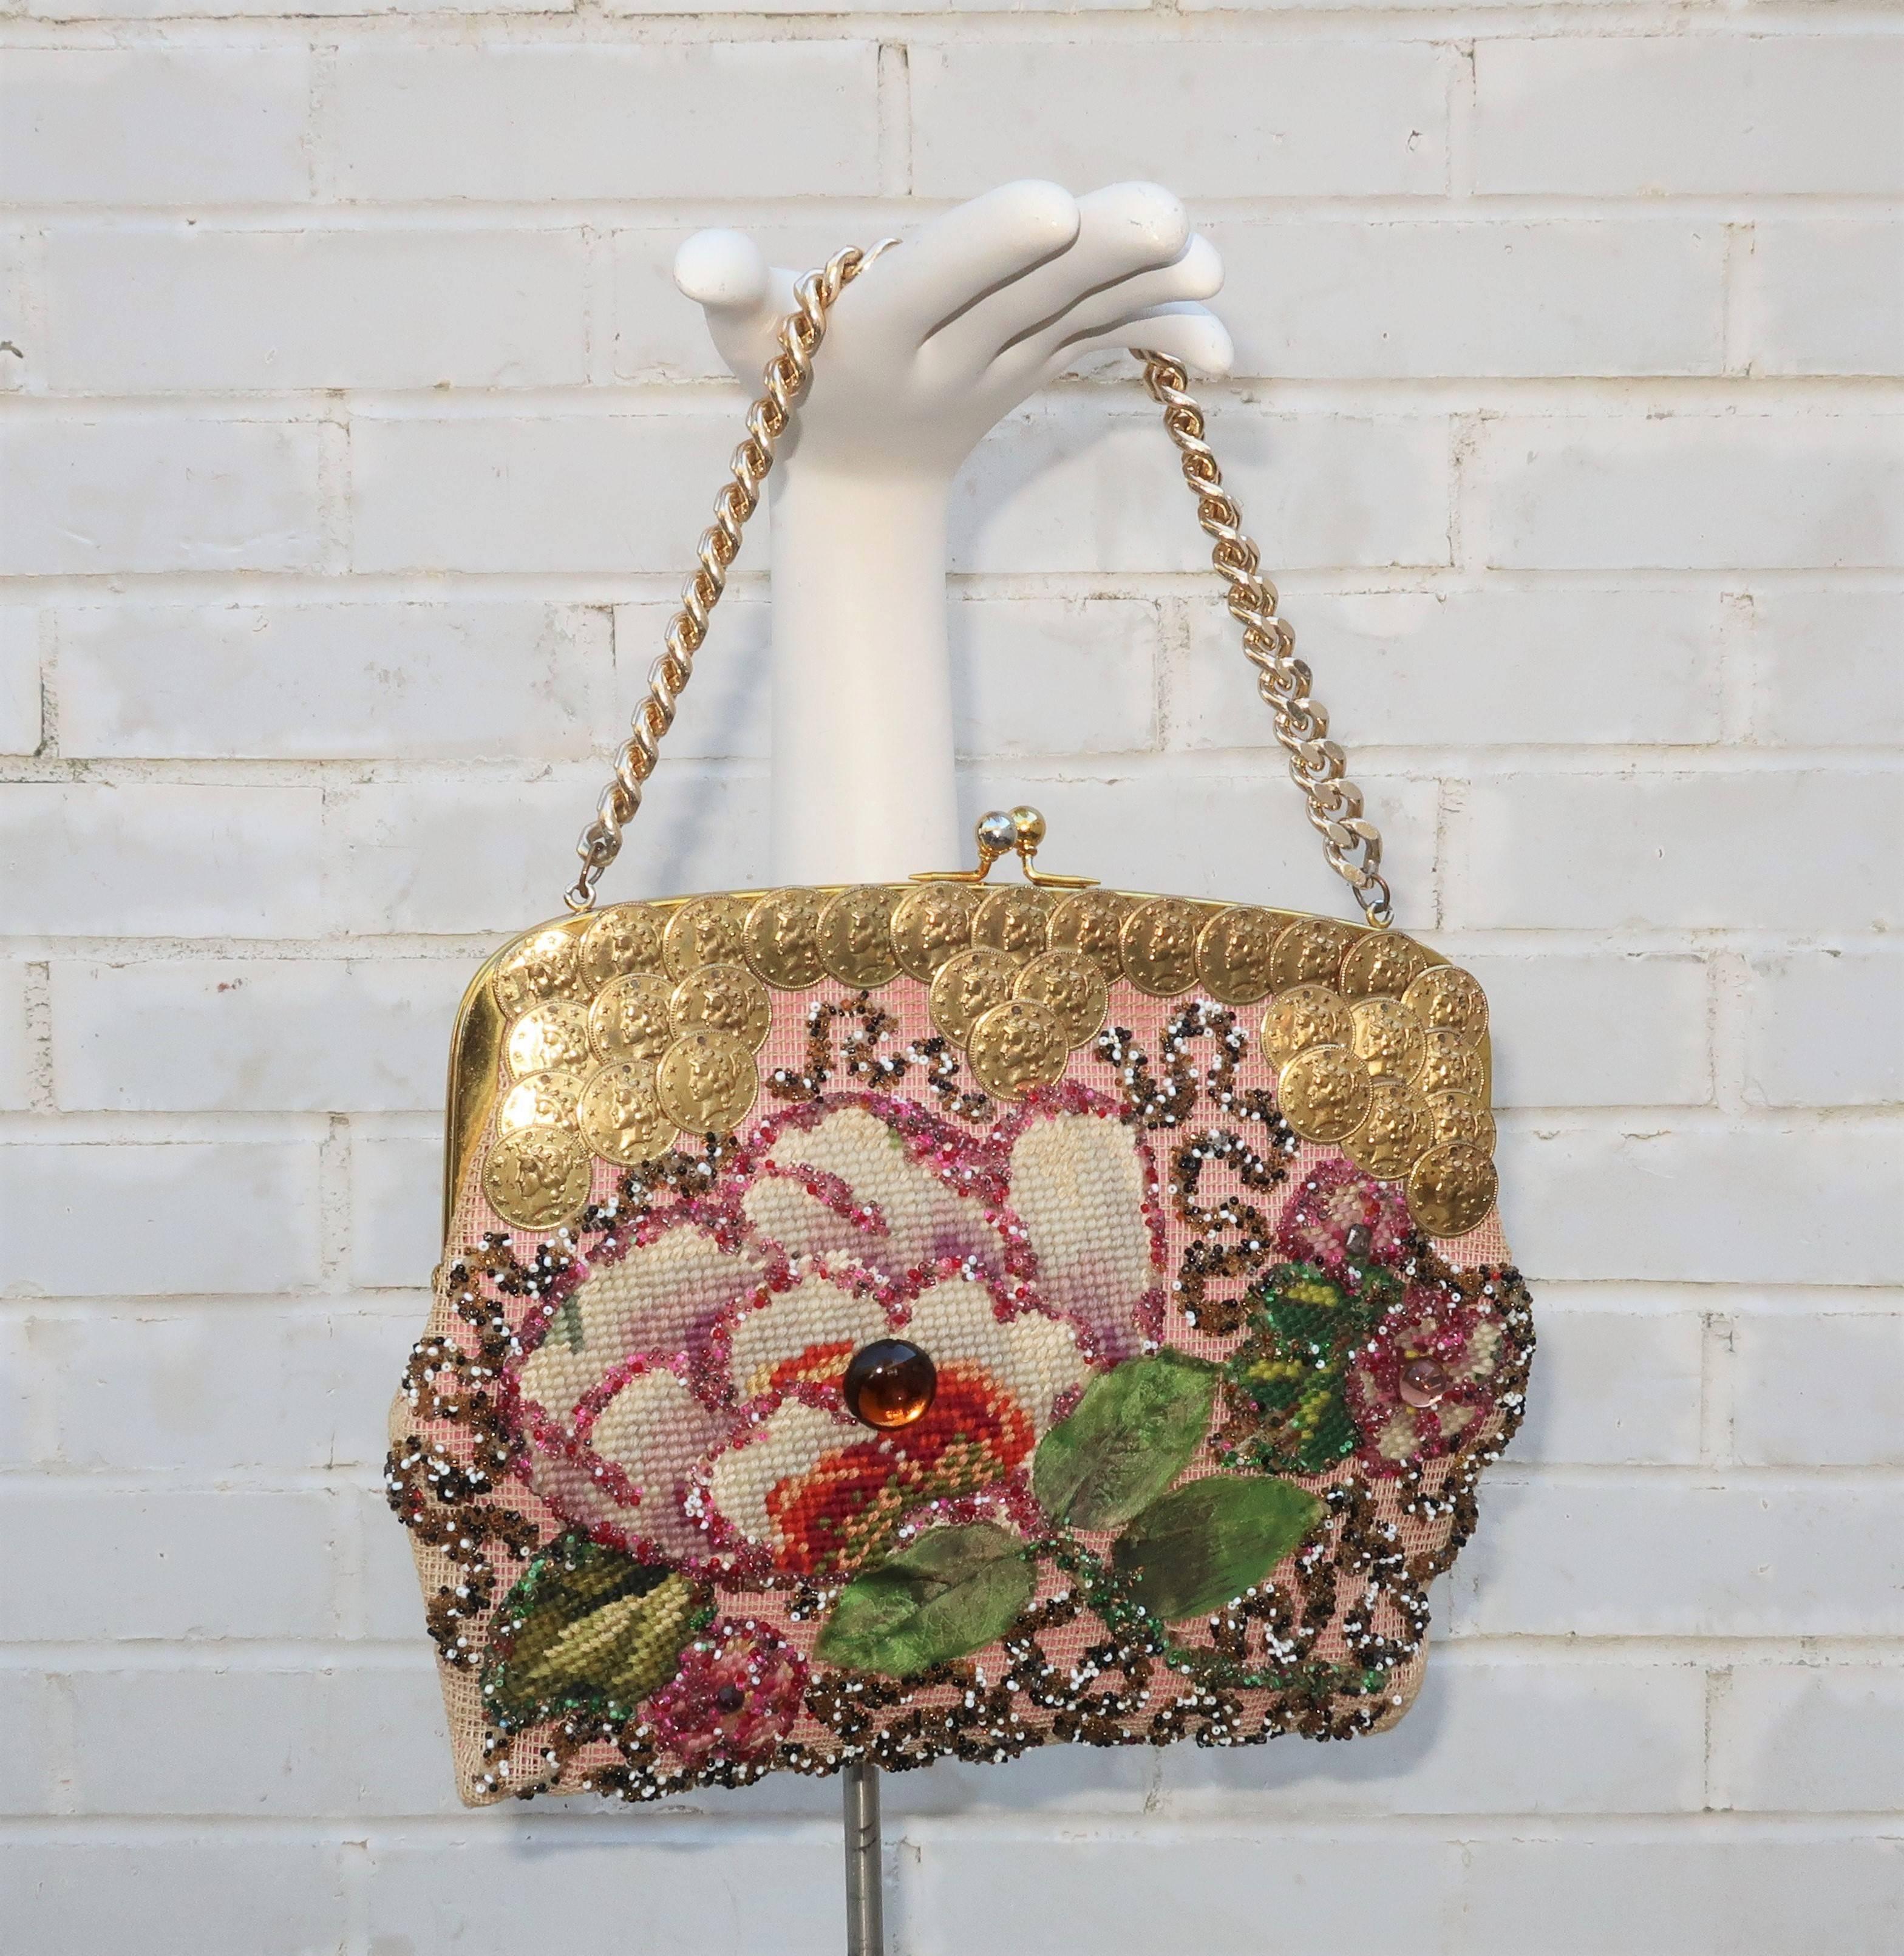 Prepare to be charmed by this 'crazy quilt' of a handbag from Jolles Original of Austria!  Jolles has quite a storied history in the world of 20th century handbag design both due to the artistic mastery of their handmade petit point creations in the